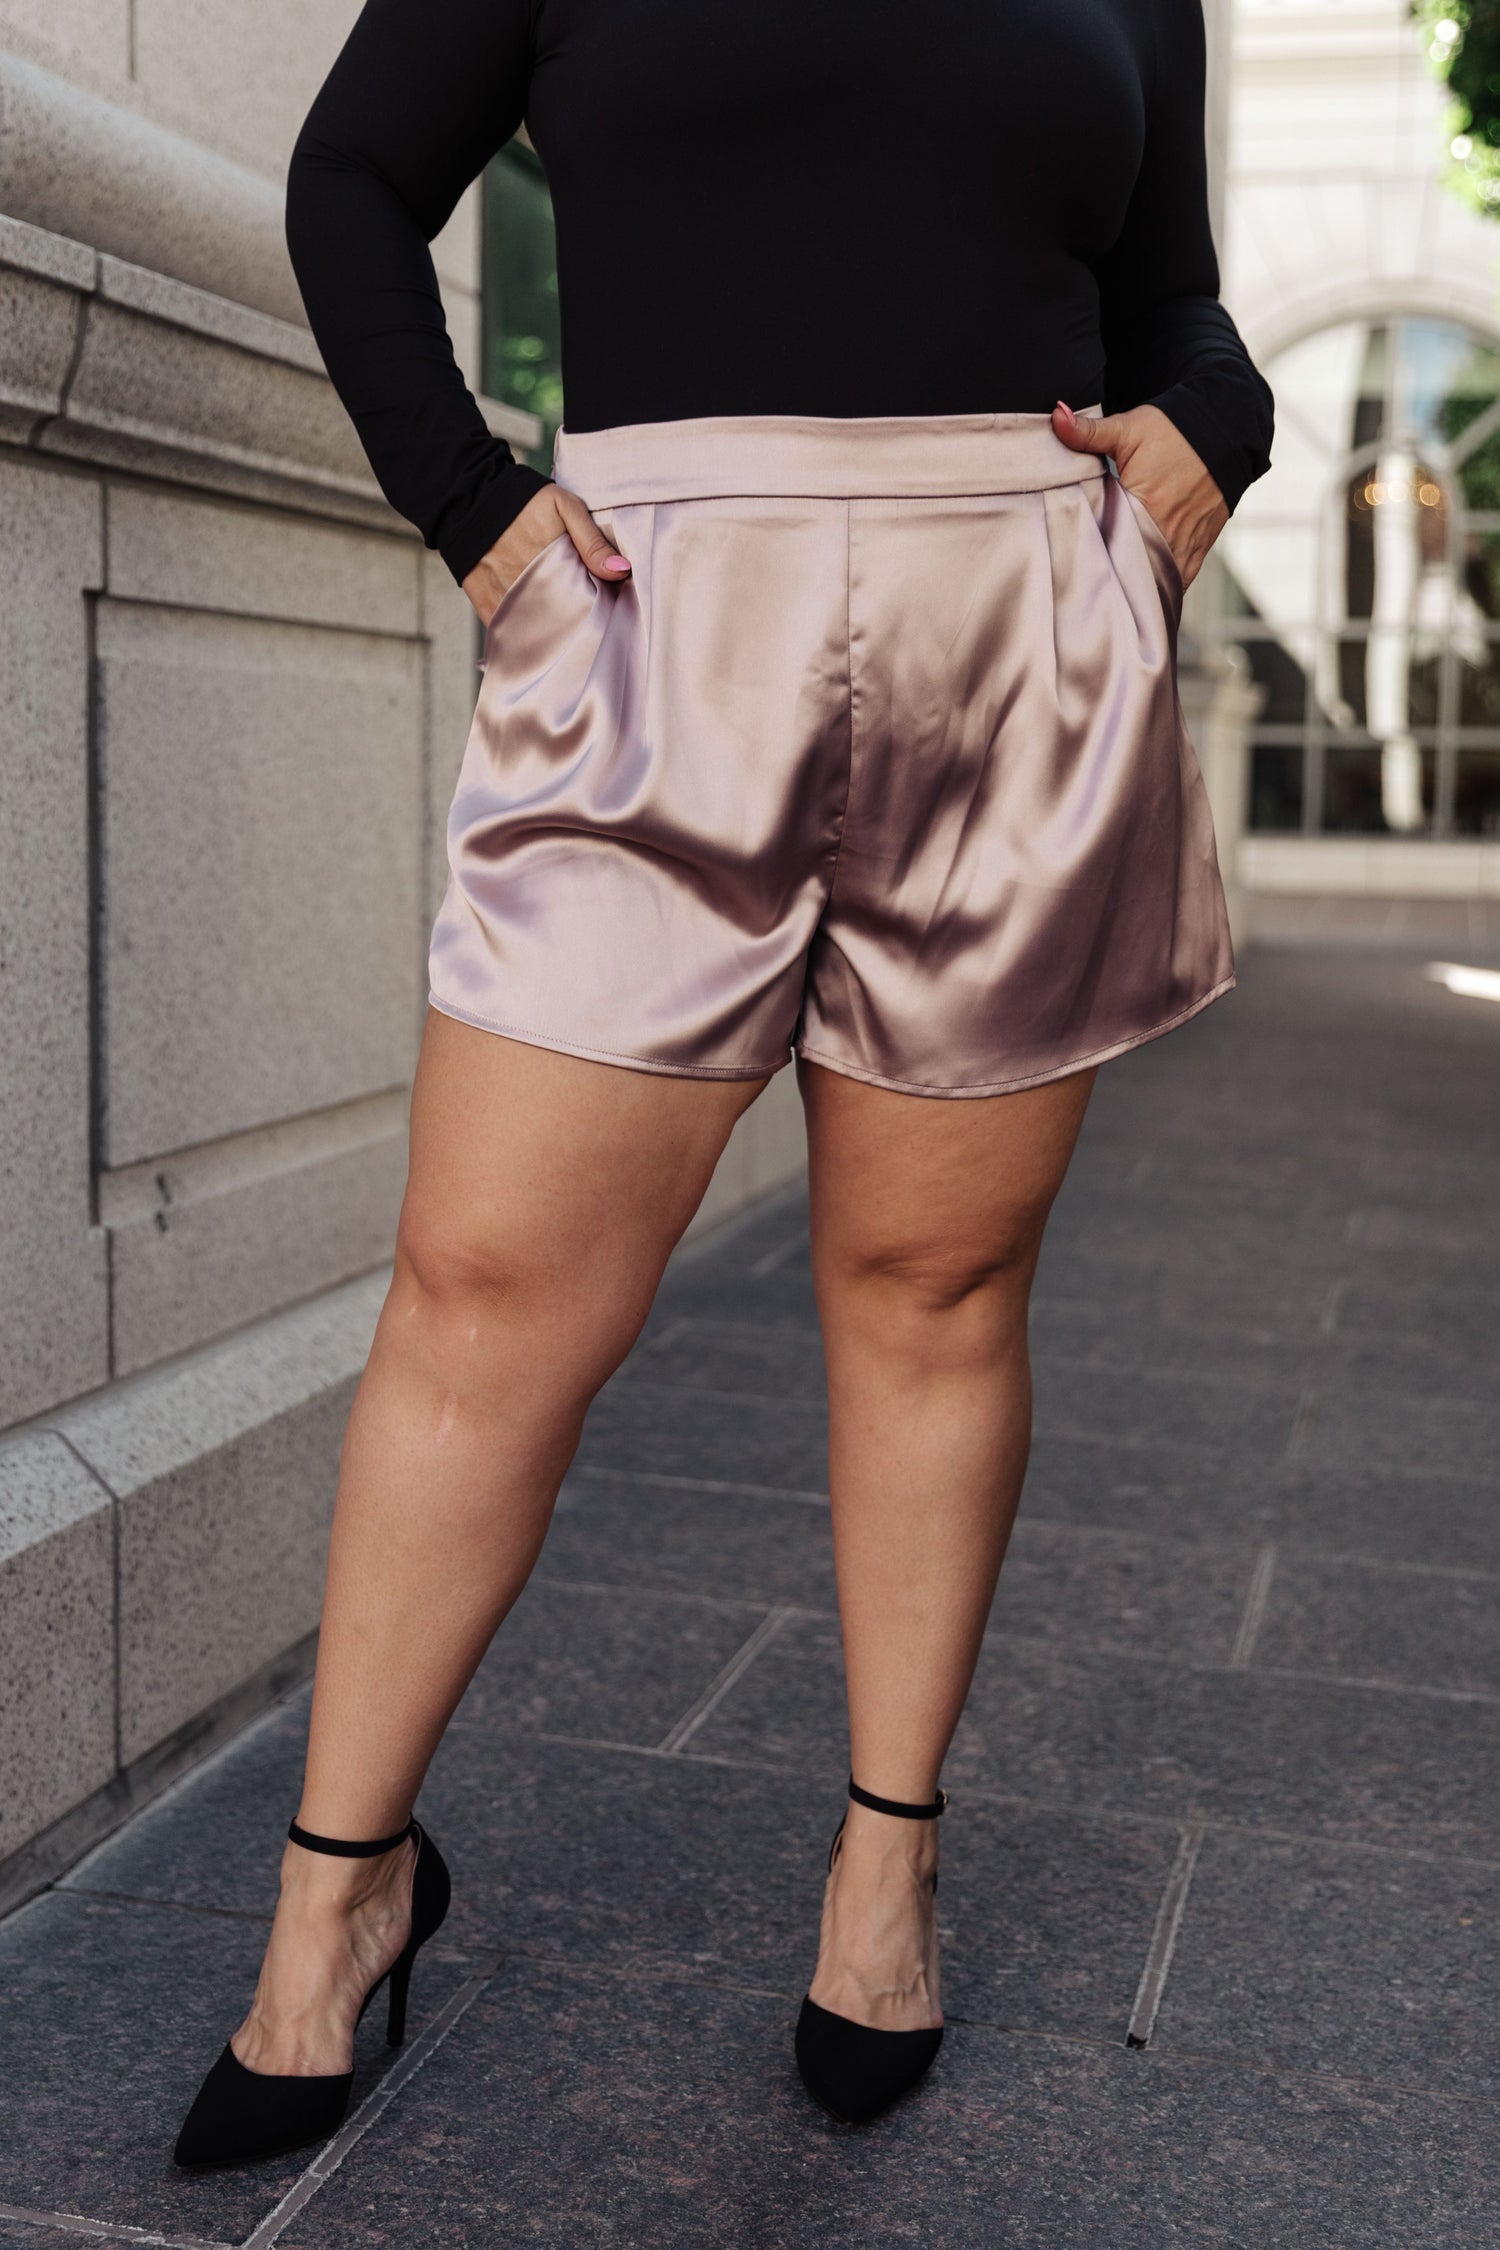 Champagne and Roses Satin Shorts - Mulberry Skies